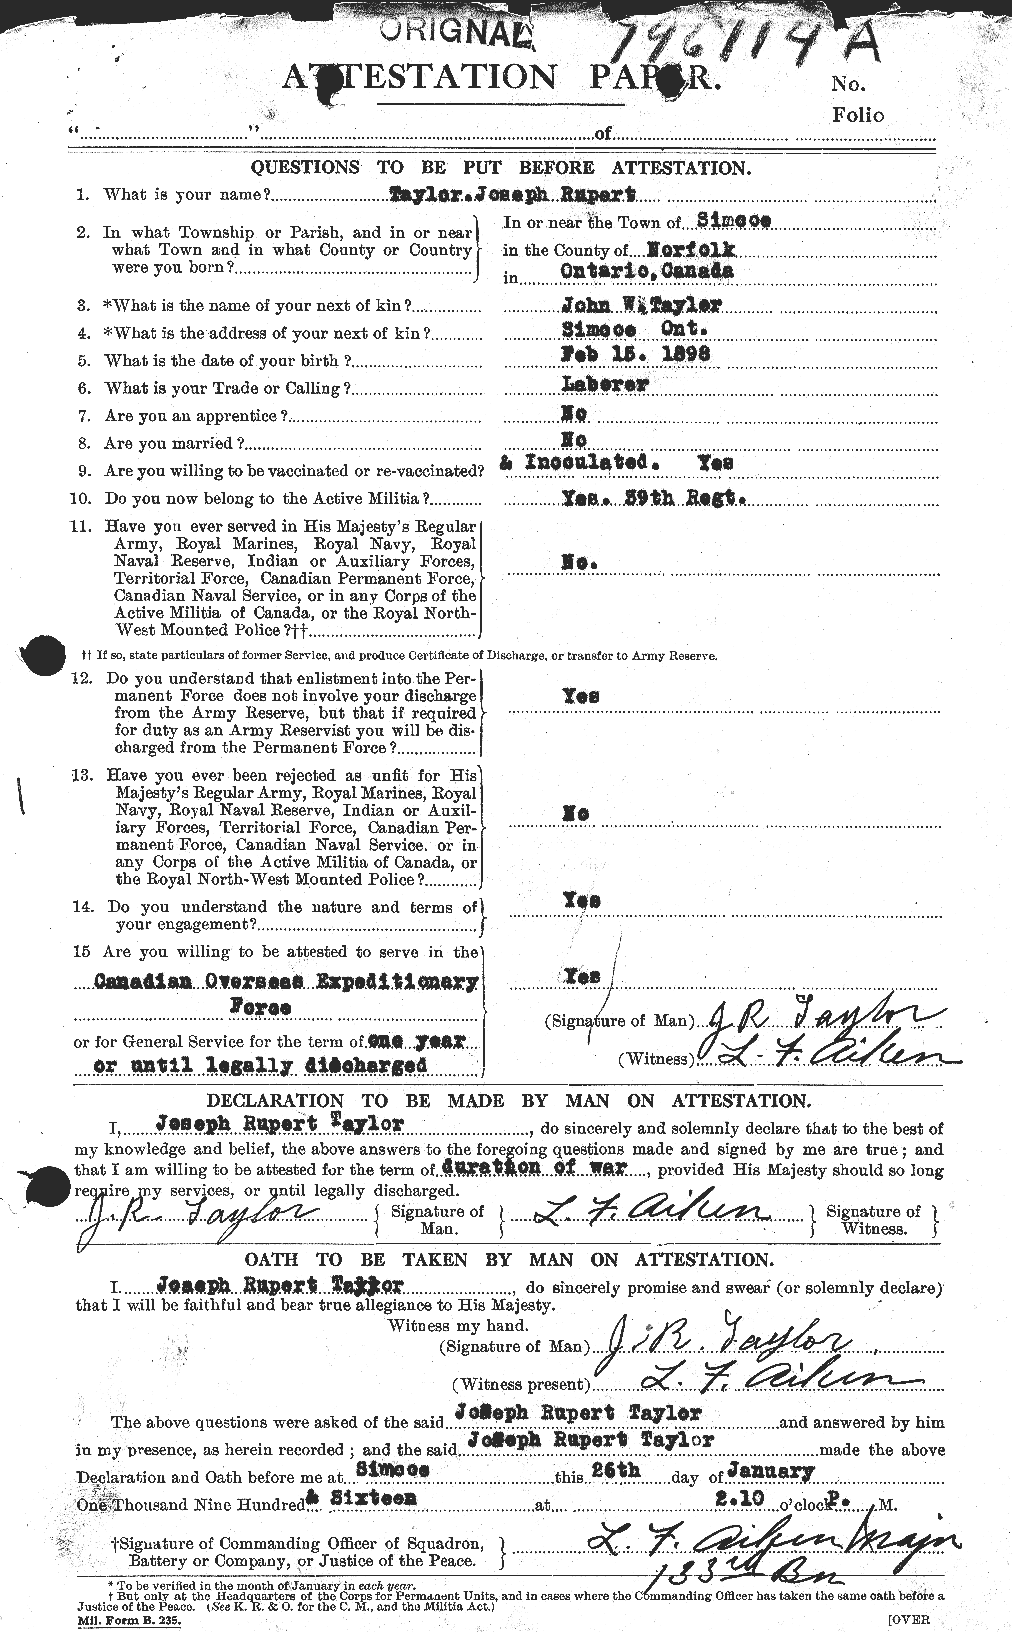 Personnel Records of the First World War - CEF 627585a